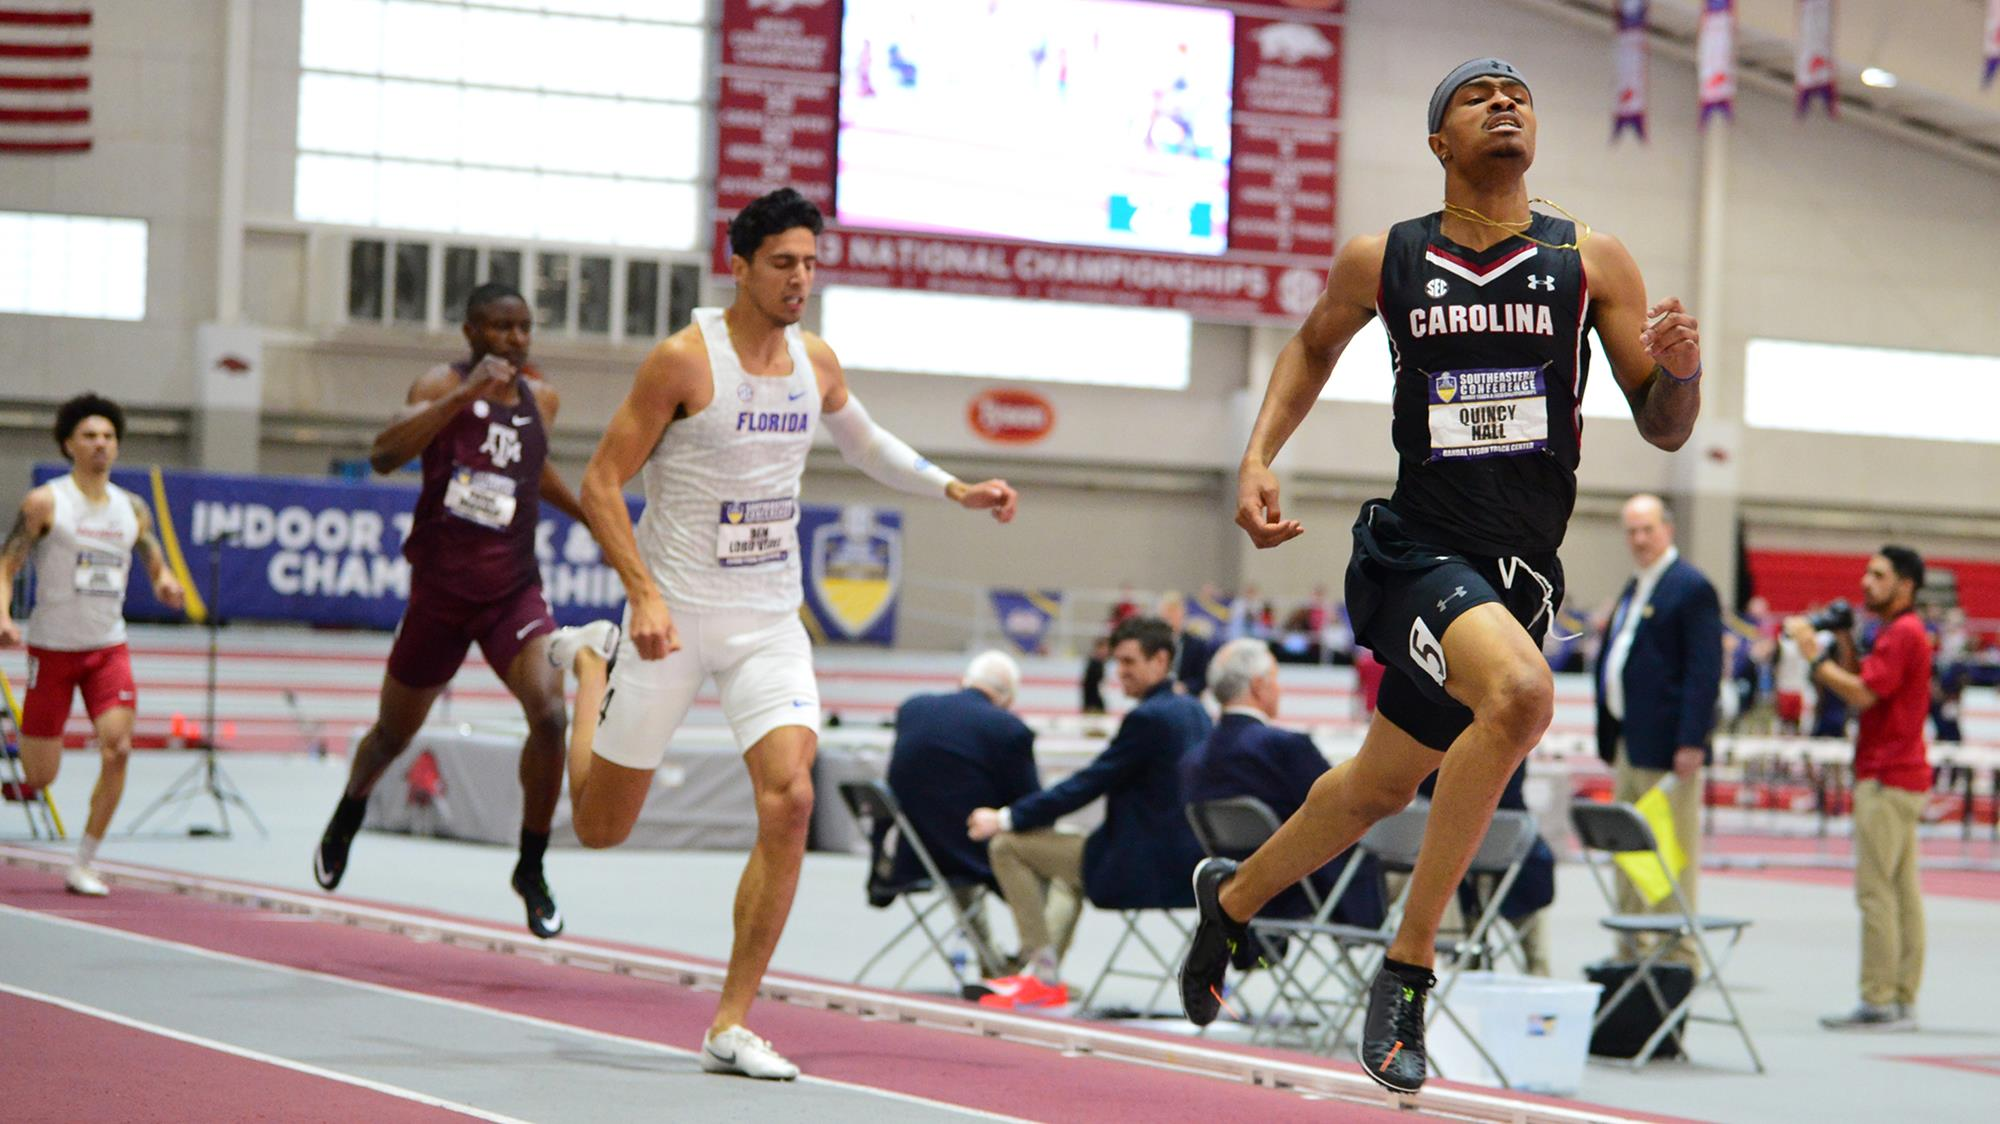 Hall Wins 400m Title on Final Day of SEC Indoor Championships